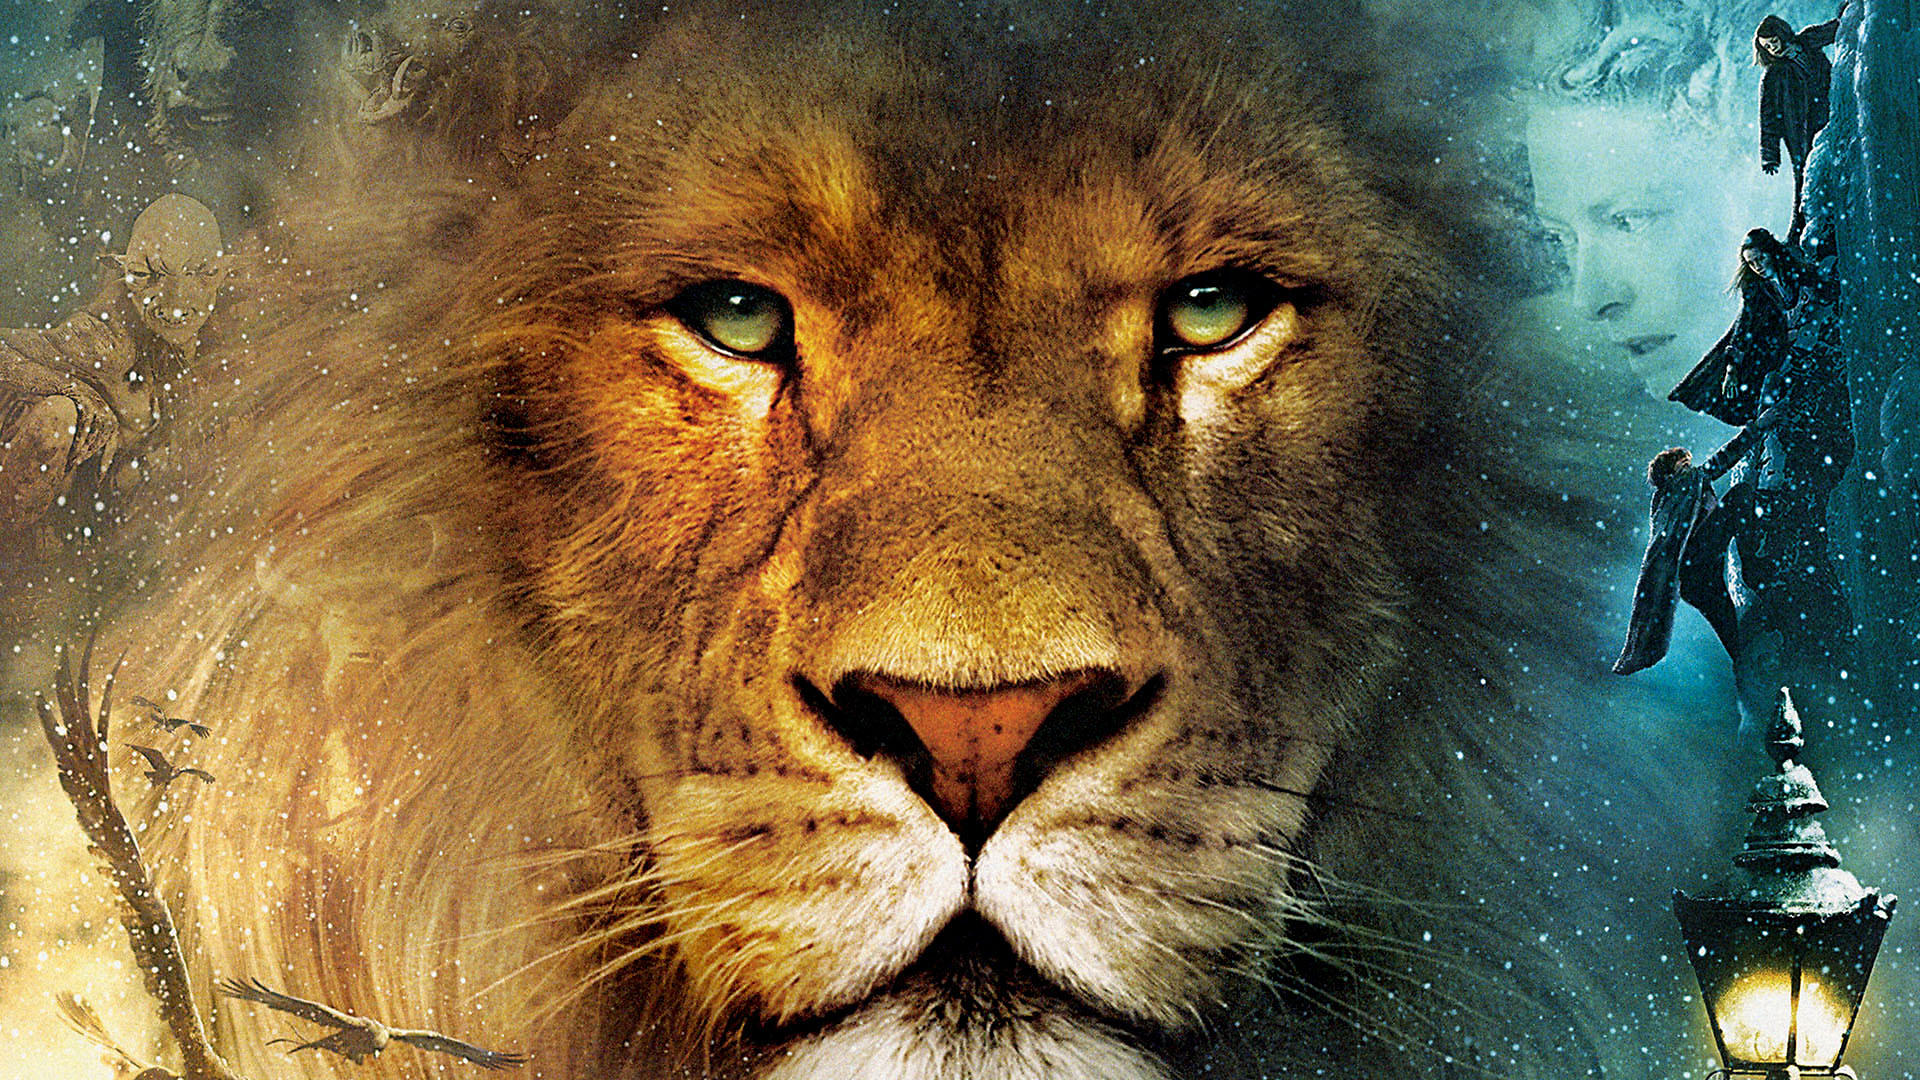 movie, the chronicles of narnia: the lion the witch and the wardrobe, lion